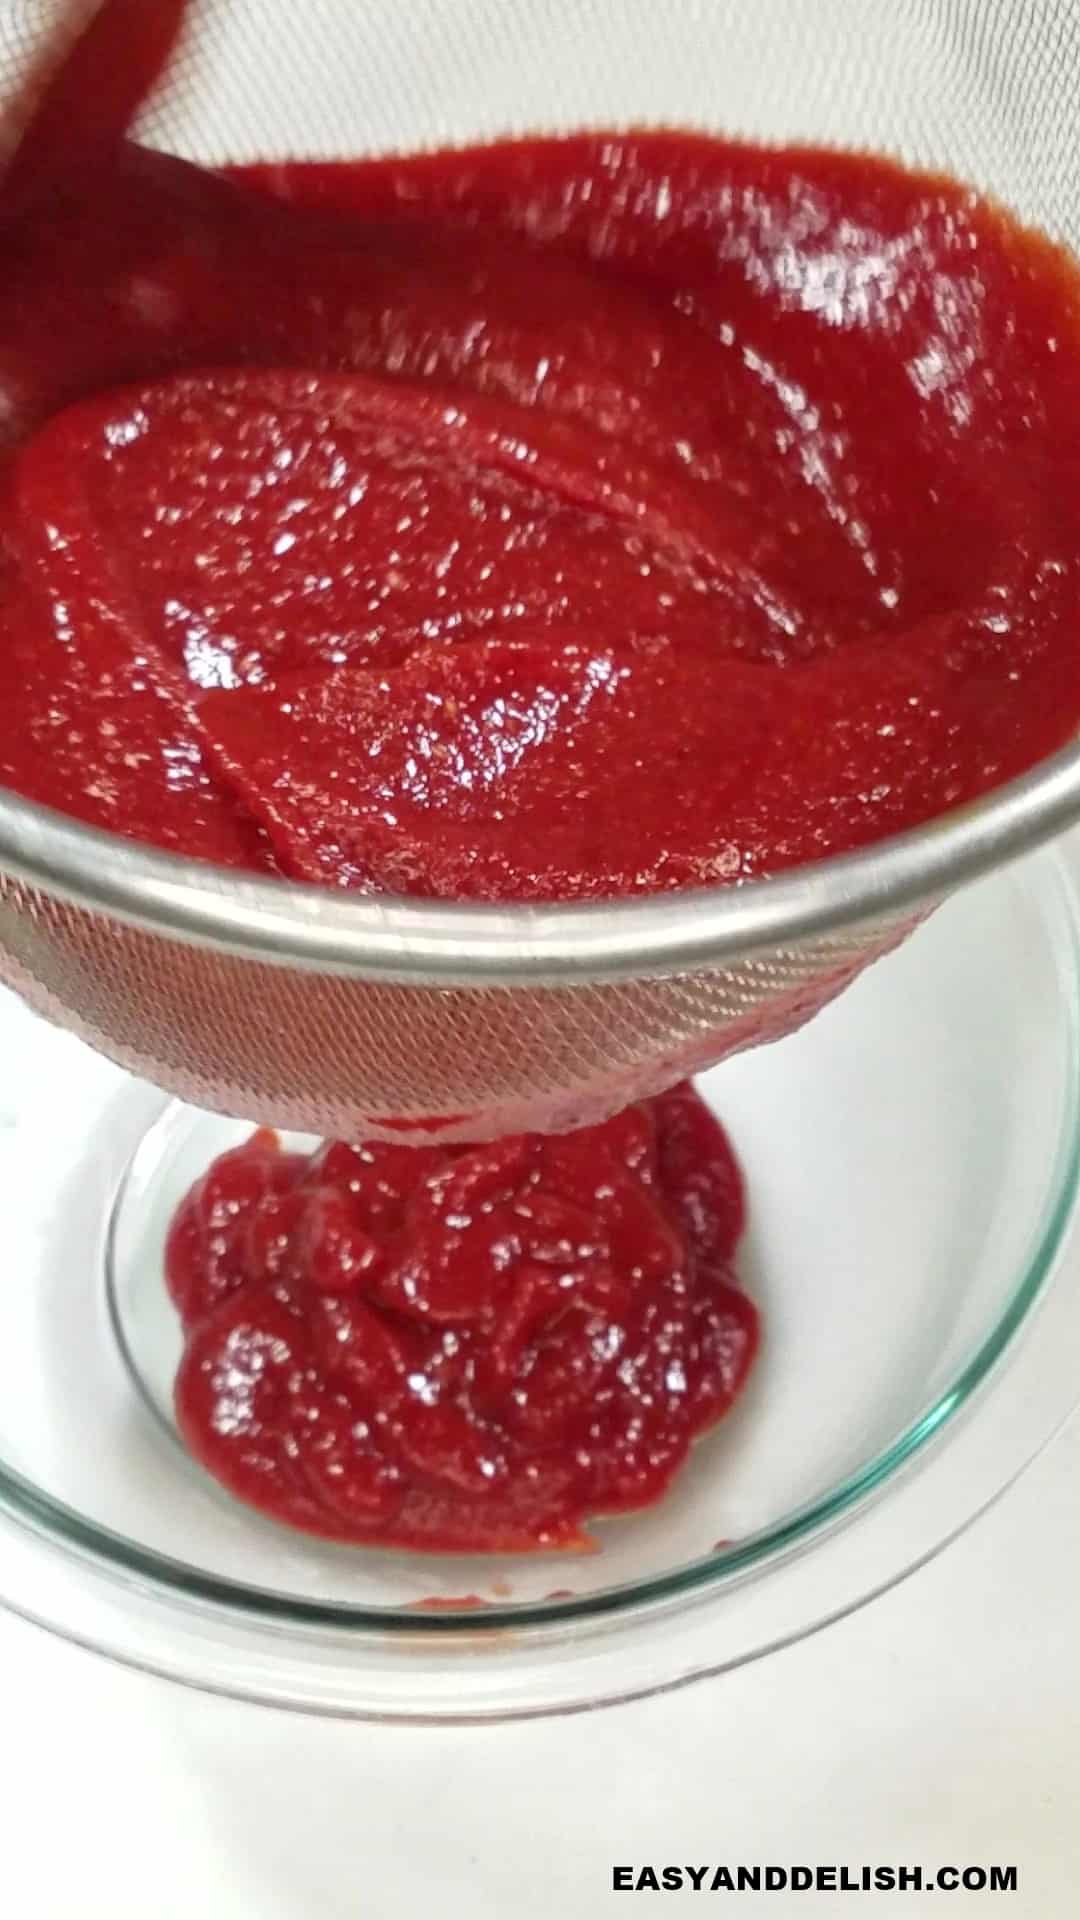 chamoy sauce strained into a bowl.